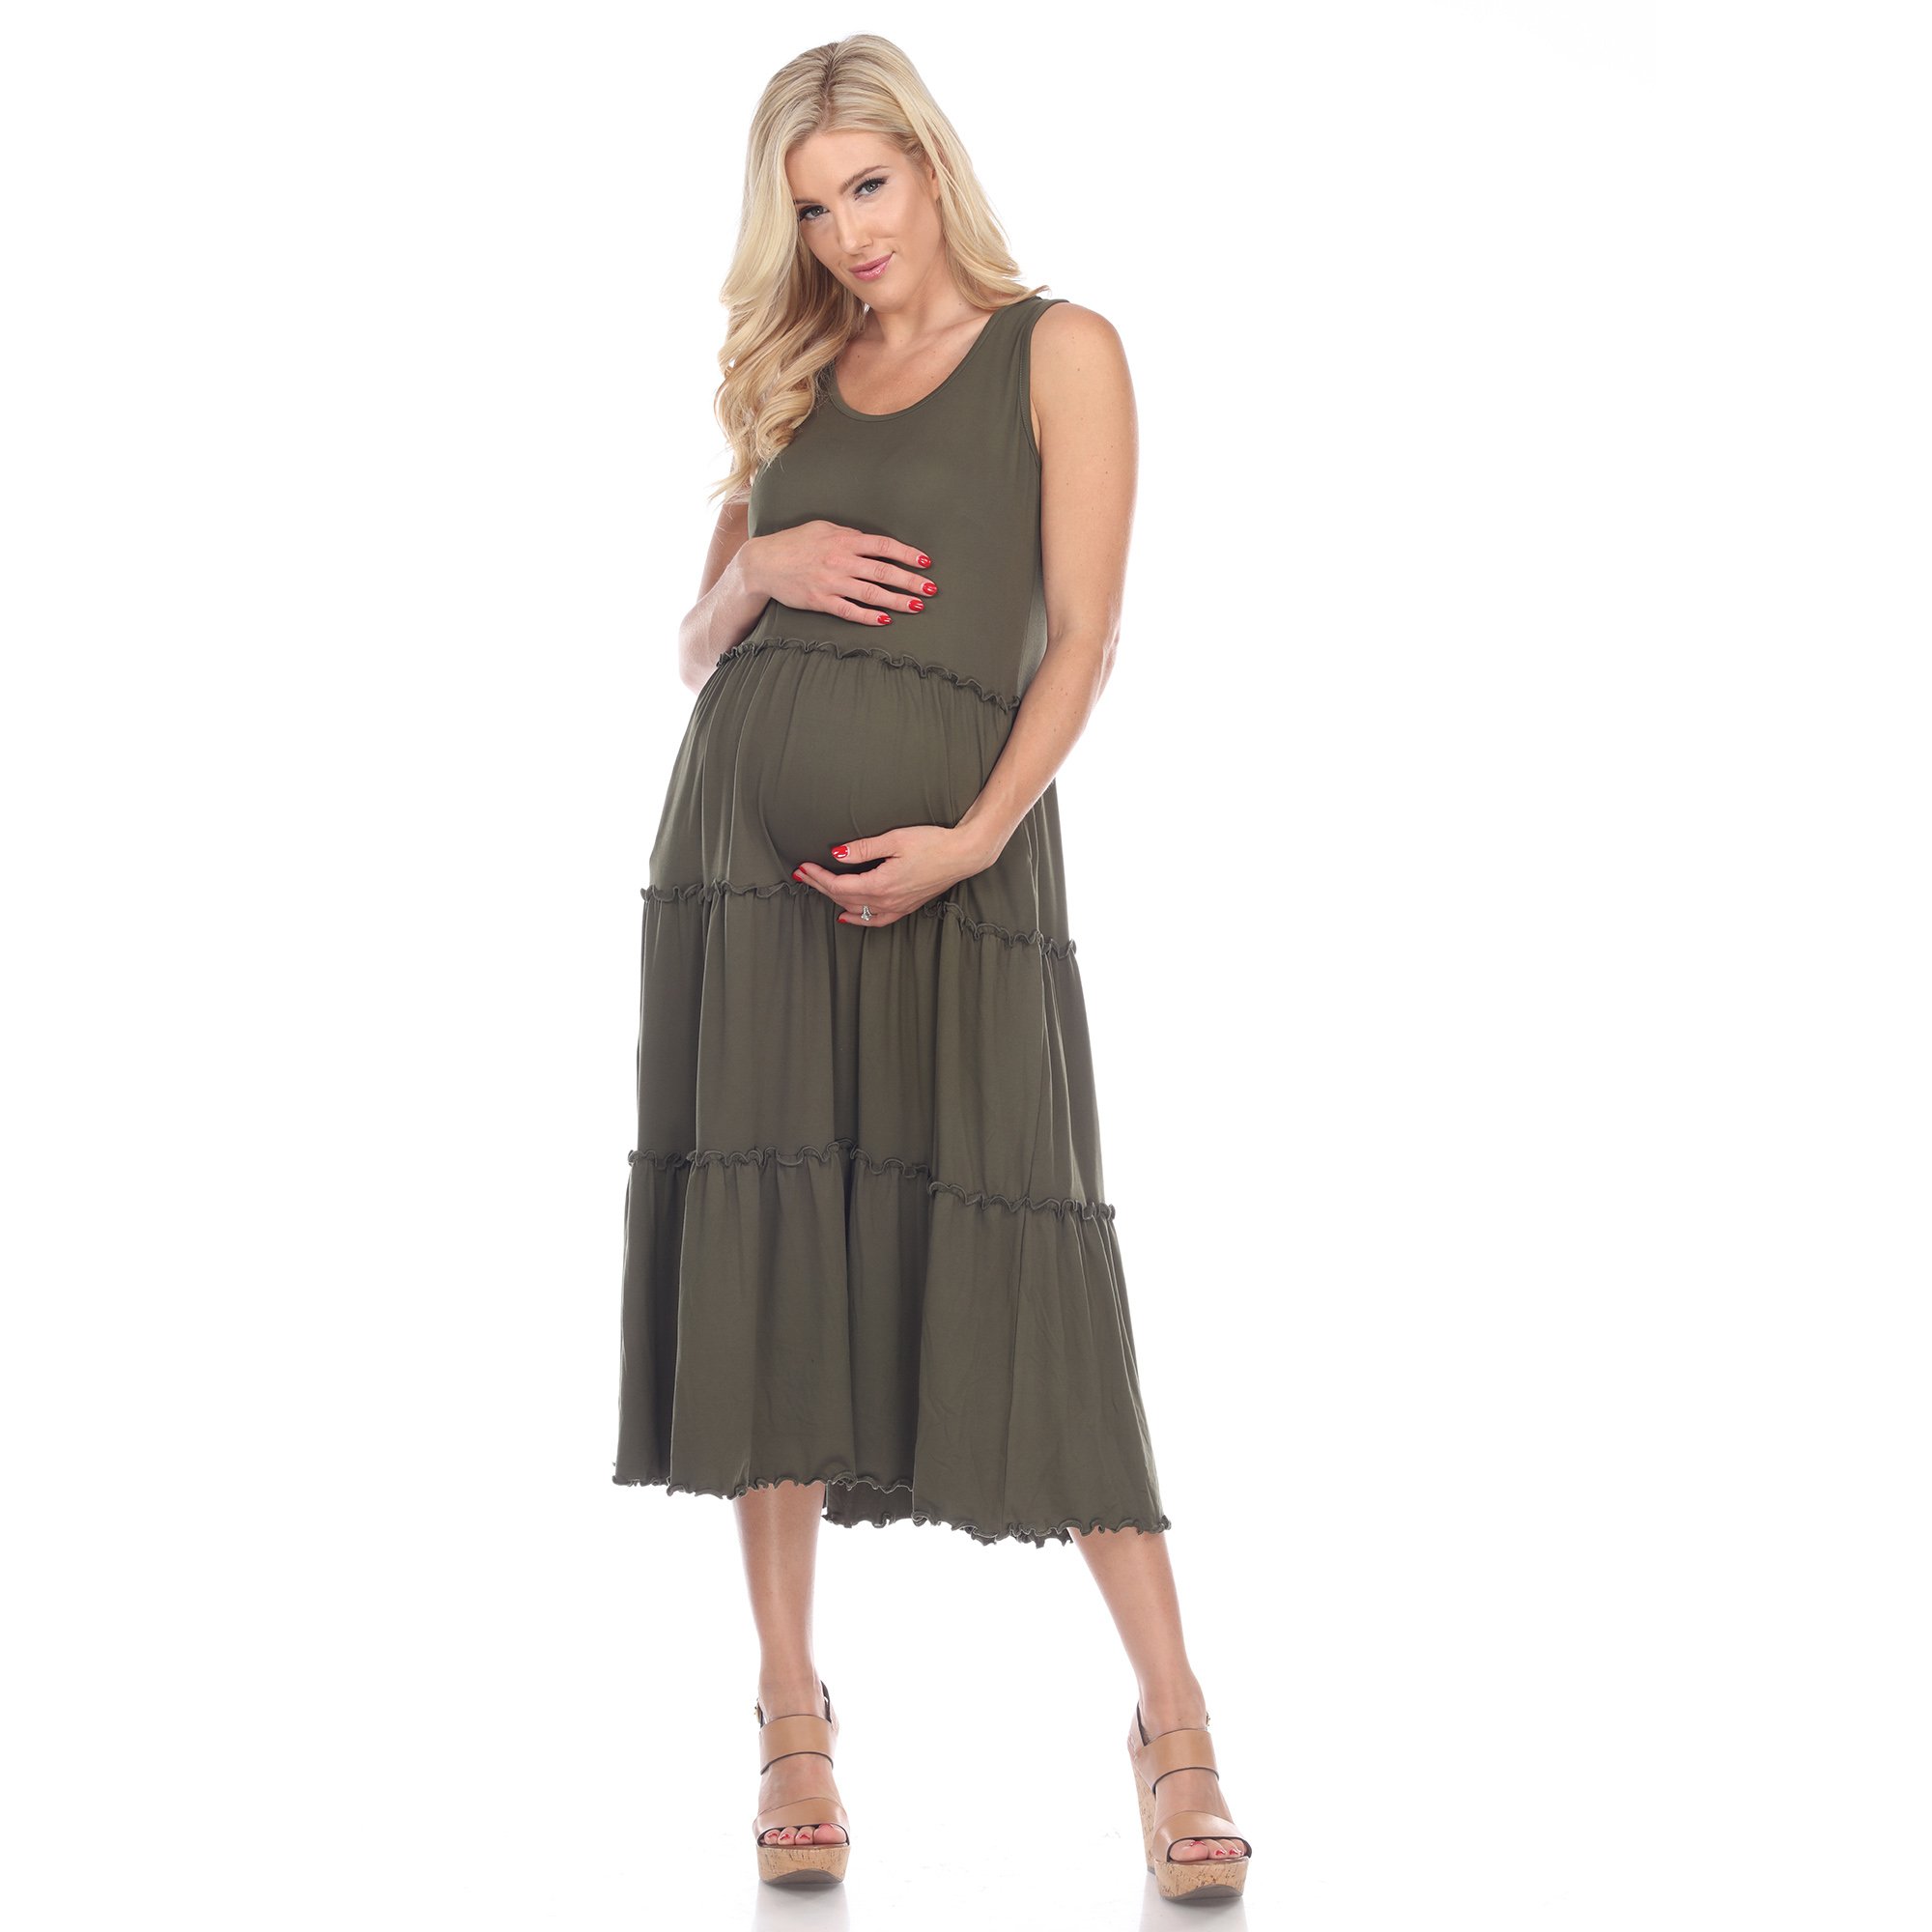 White Mark Women's Maternity Scoop Neck Tiered Midi Dress - Pale Olive, X-Large